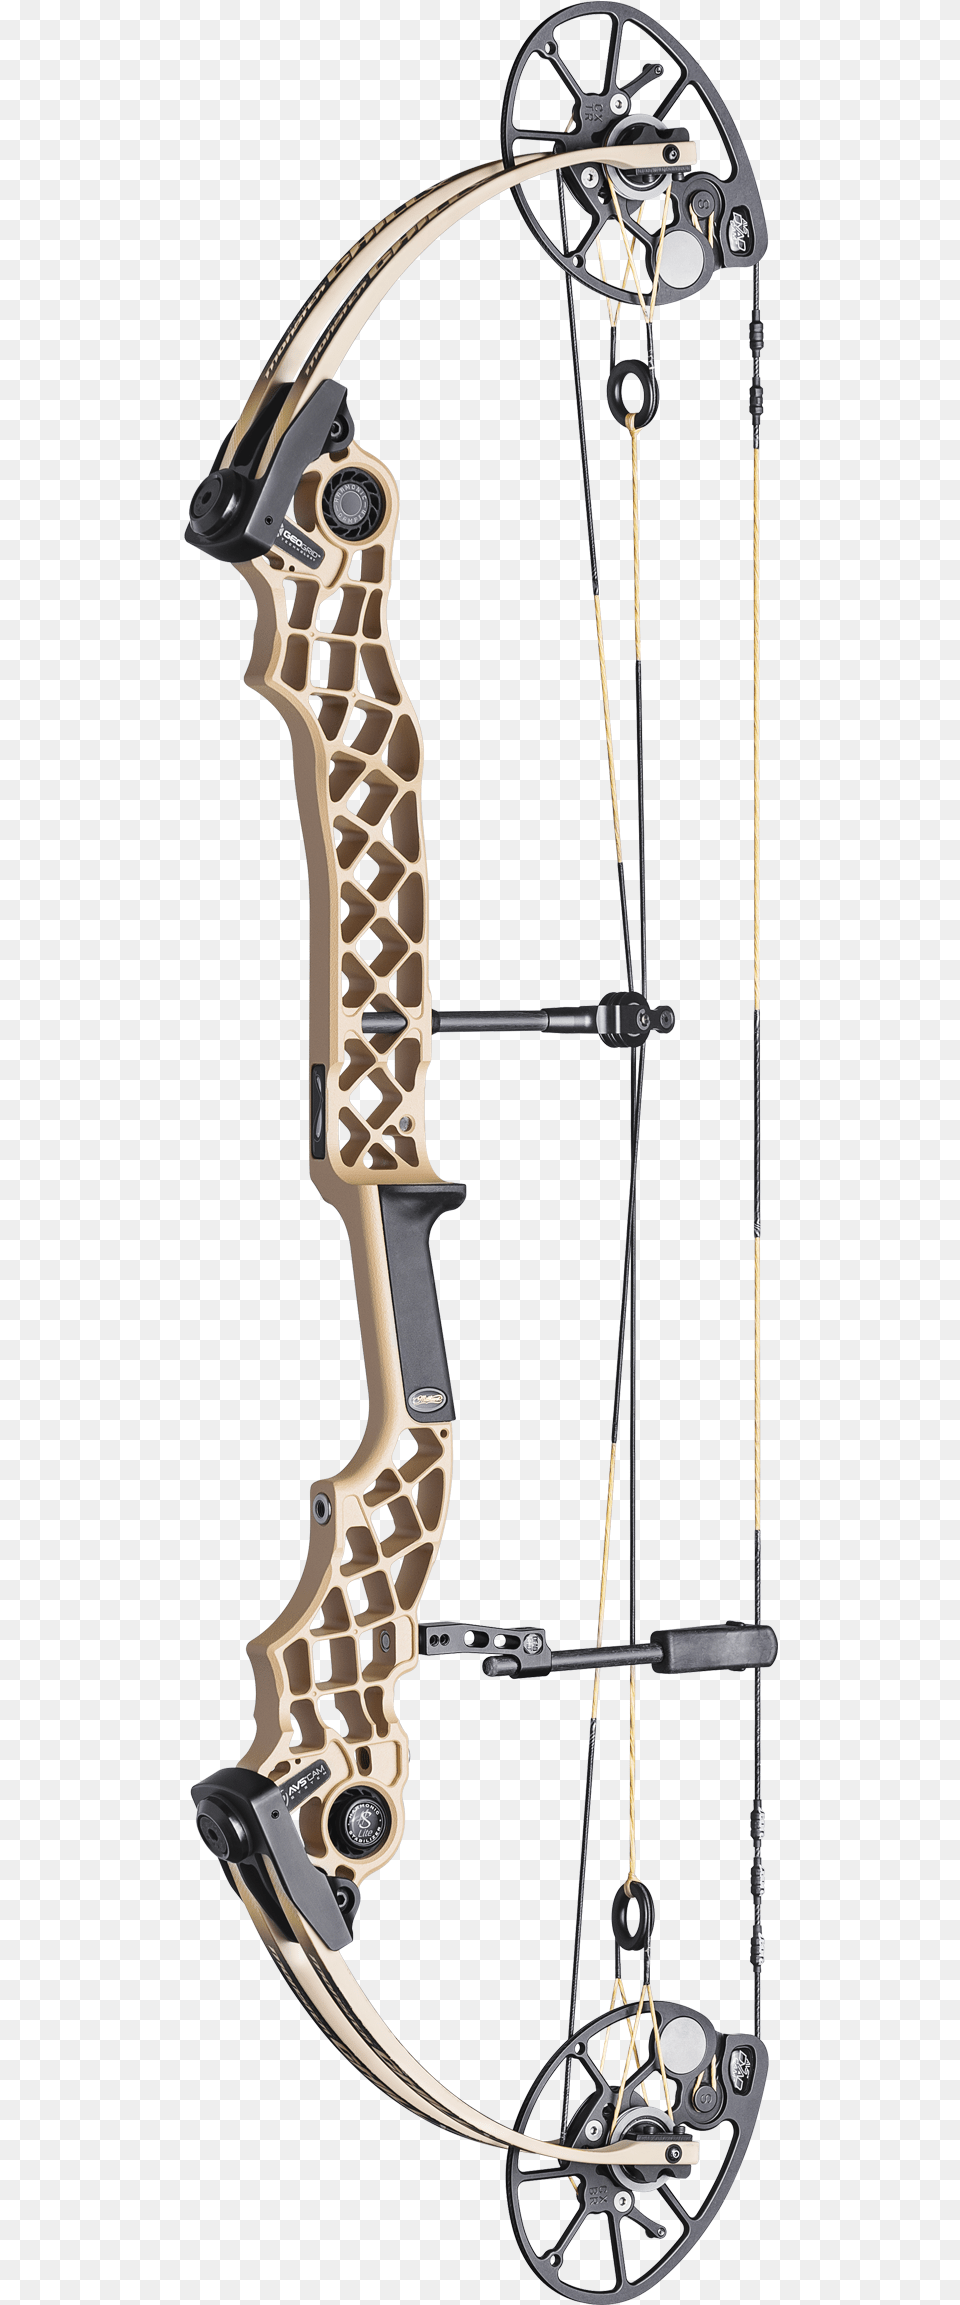 Desert Tactical, Bow, Weapon Png